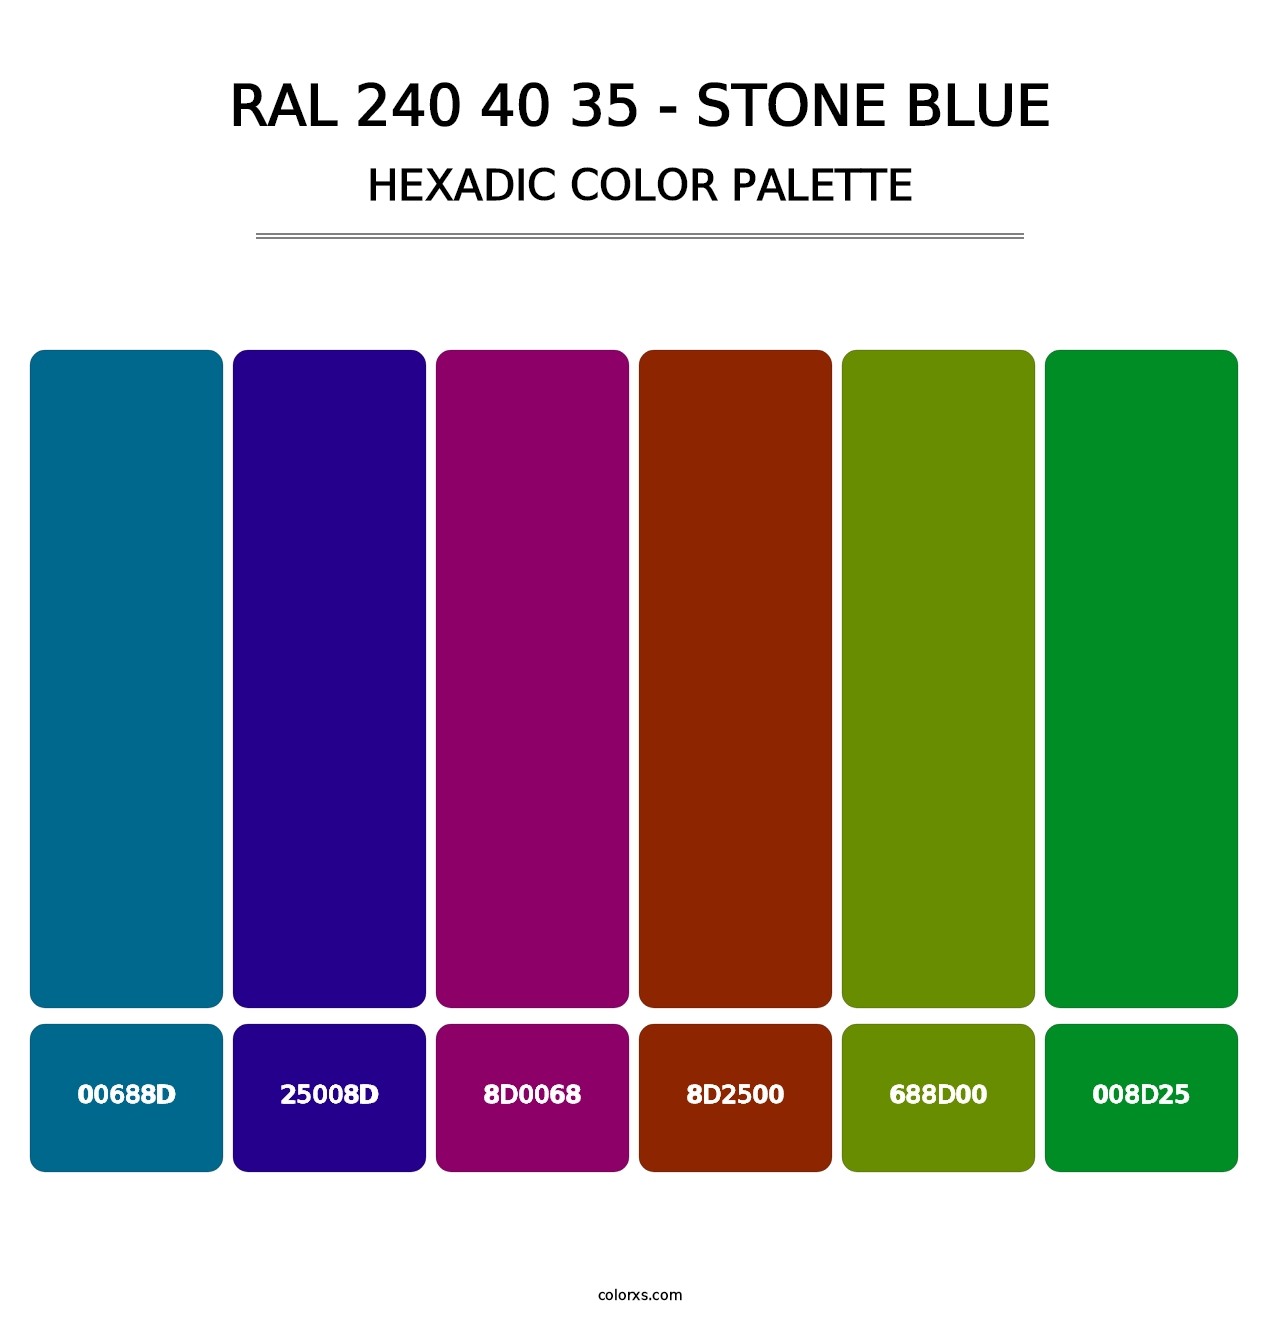 RAL 240 40 35 - Stone Blue - Hexadic Color Palette